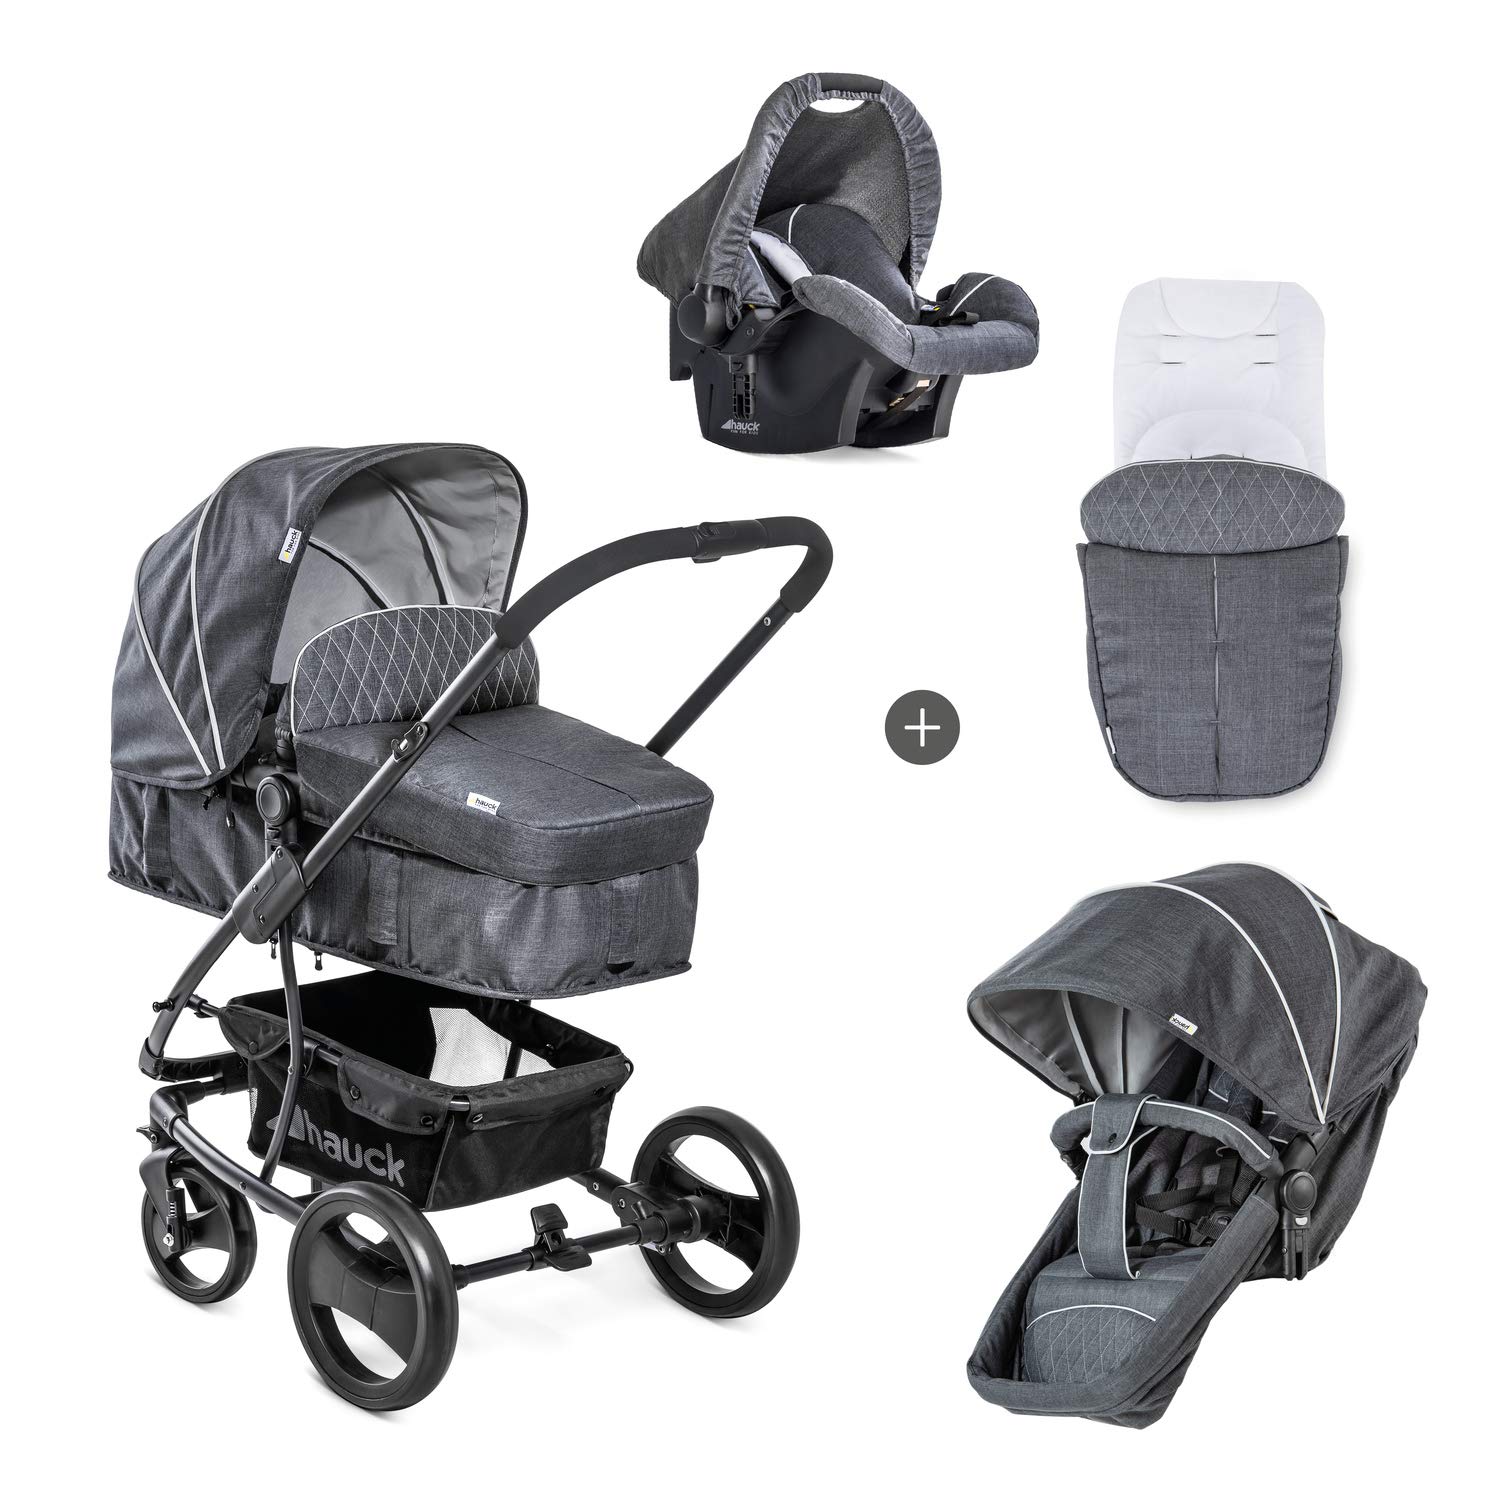 Hauck Pacific 4 Shop N Drive, 6-Piece Combination Lightweight Pushchair Set, Up to 25 kg with Baby Seat, Baby Tub Convertible, Reversible Seat Unit with Leg Cover